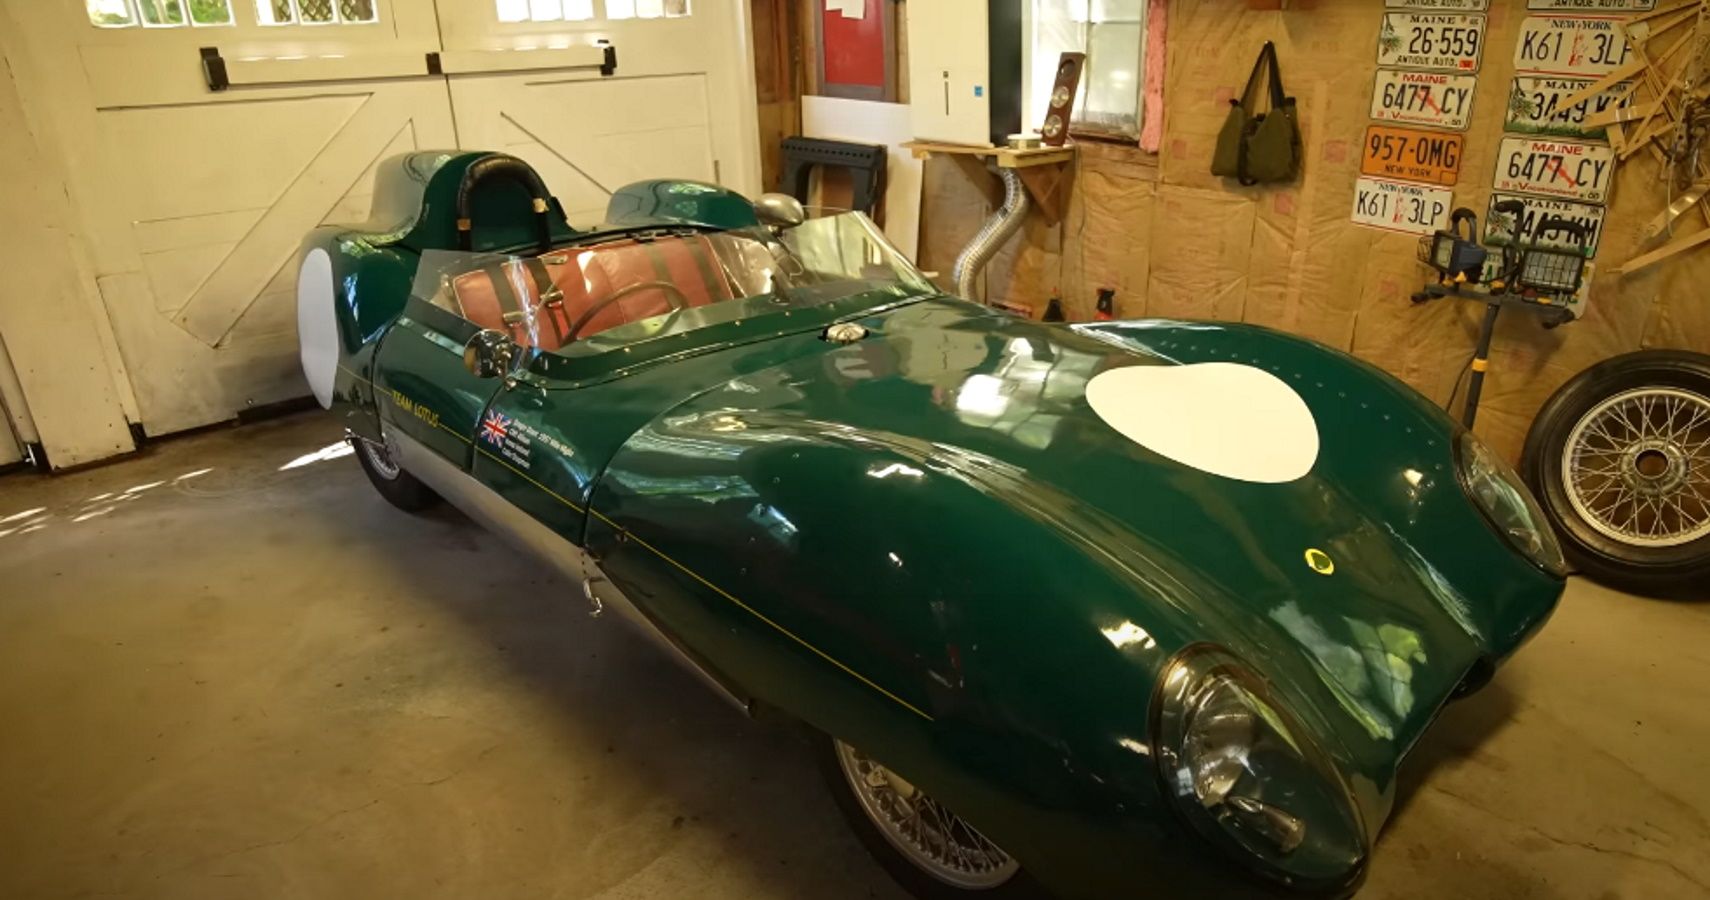 A green Lotus Eleven race car in a garage